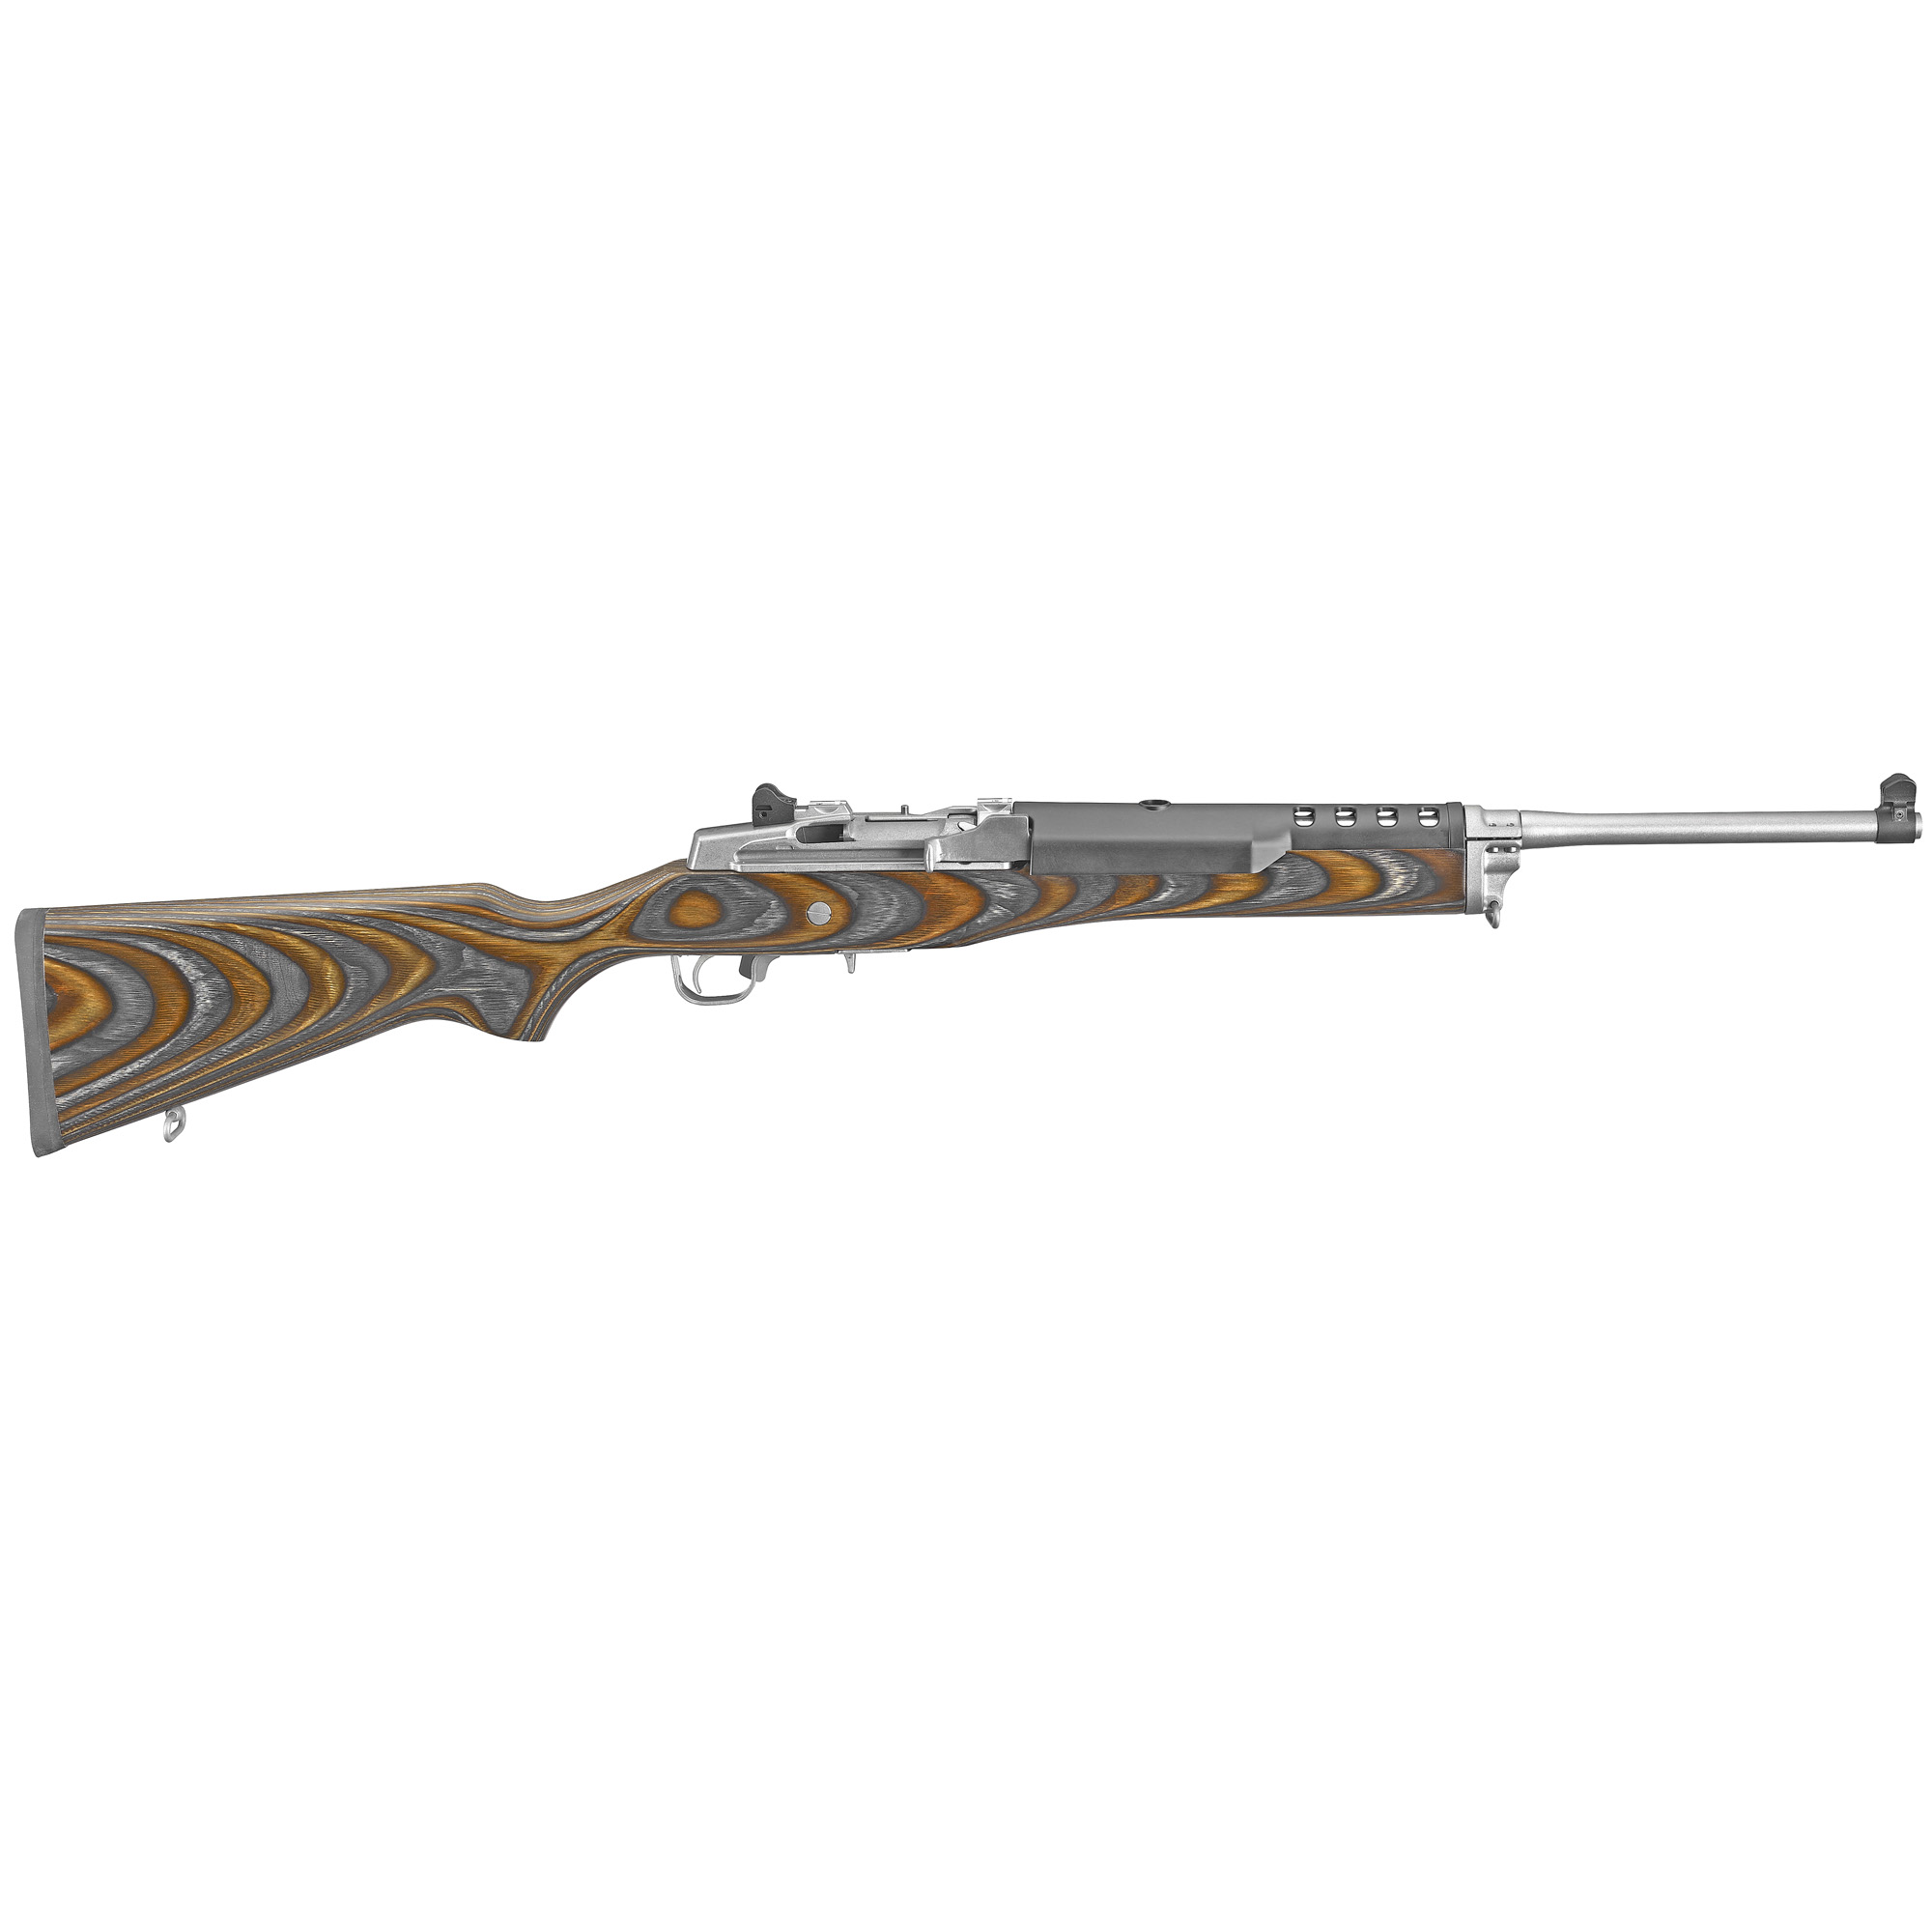 RUGER MINI-14 556NATO 18.5 5RD SS